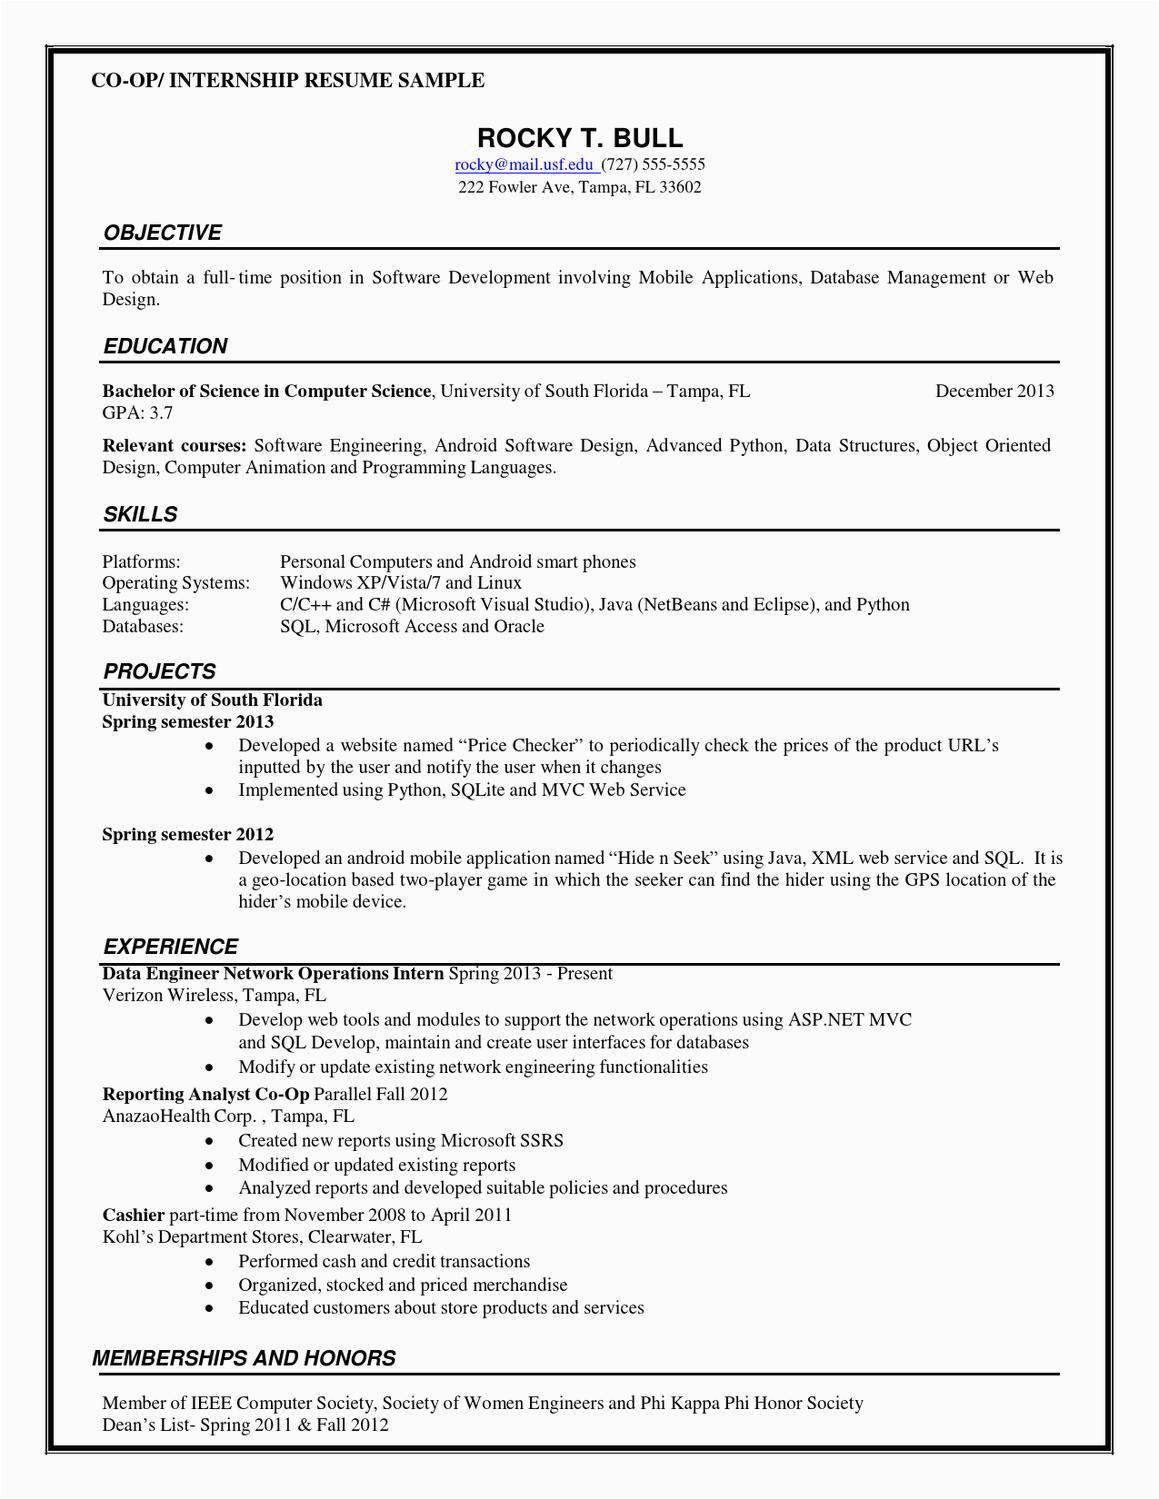 Sample Resume for Co Op Position Co Op and Internship Resume Sample by Rosaria Pipitone issuu